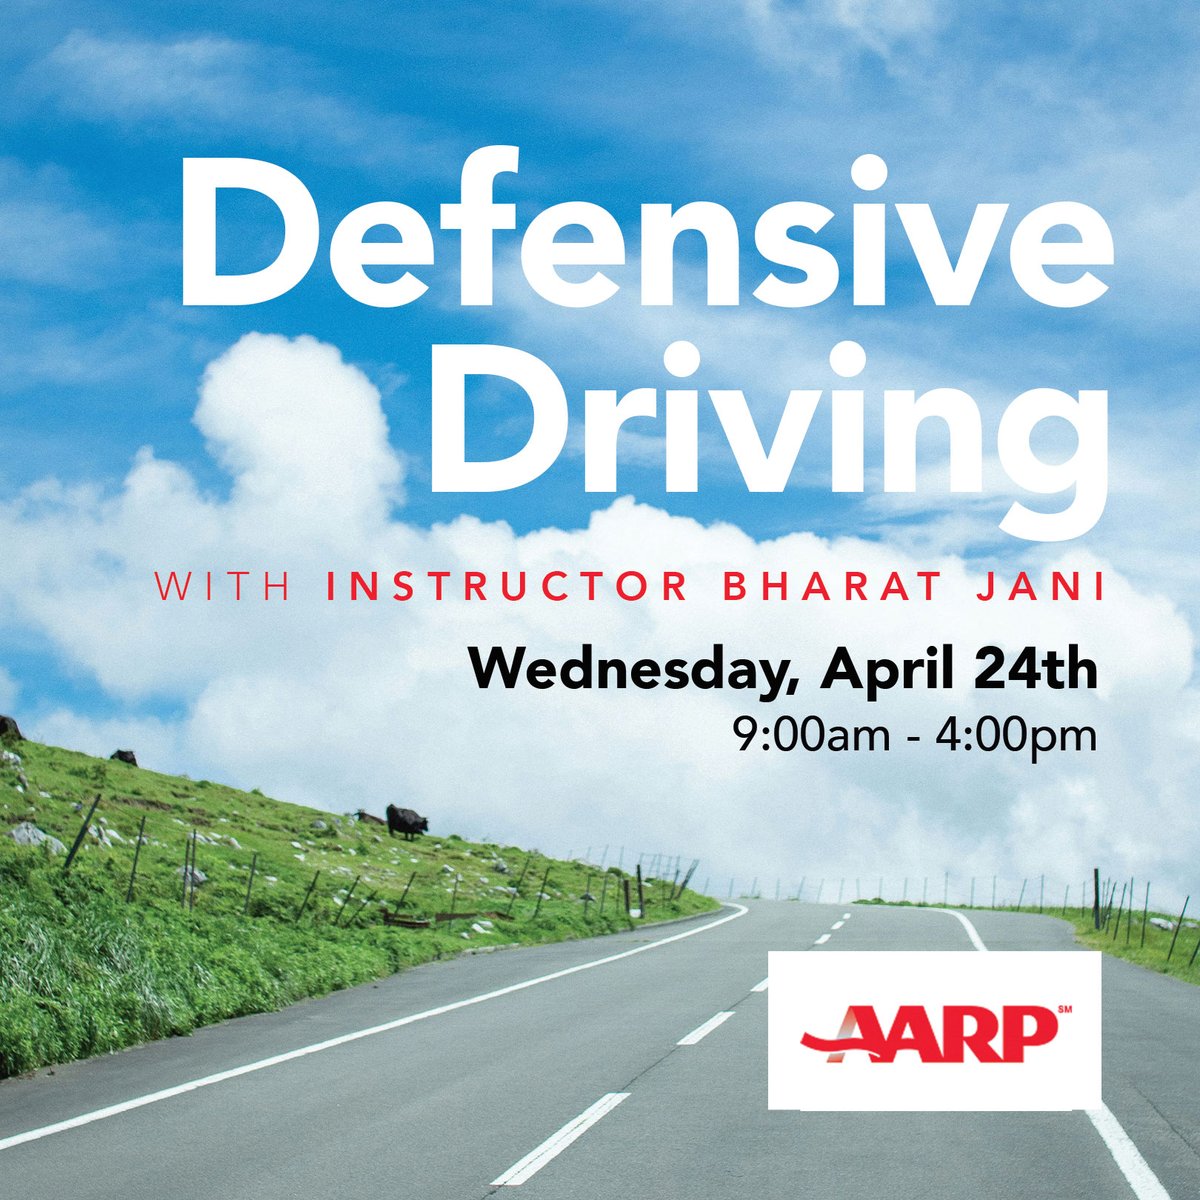 A $30 fee ($25 for current AARP members with member number written on check) is due by April 23.  Limited space. Visit our website to register. 

#AARP #defensivedriving #driving #defensivedrivingcourse #hhfl #librariesrock